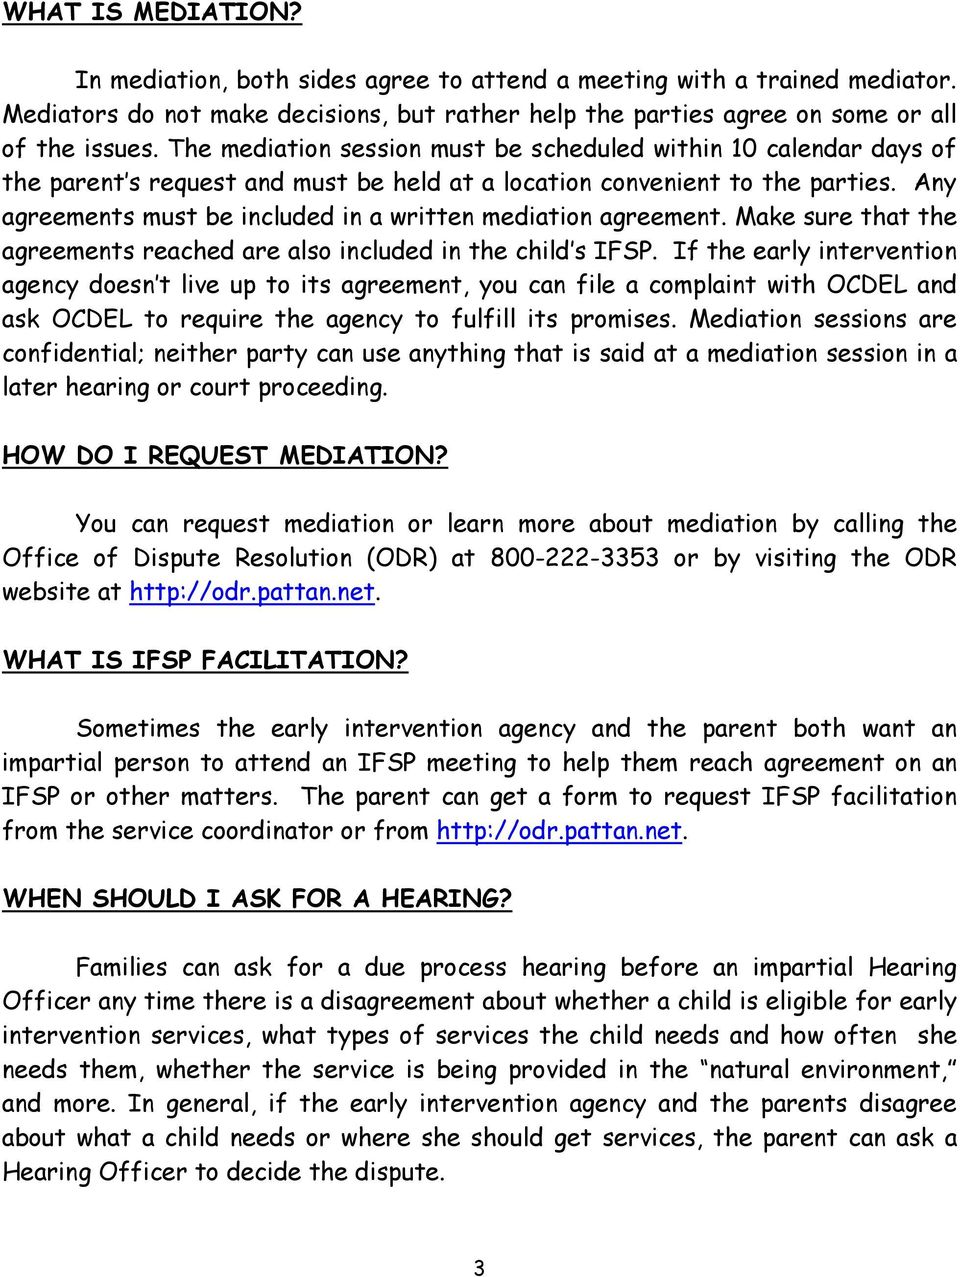 Any agreements must be included in a written mediation agreement. Make sure that the agreements reached are also included in the child s IFSP.